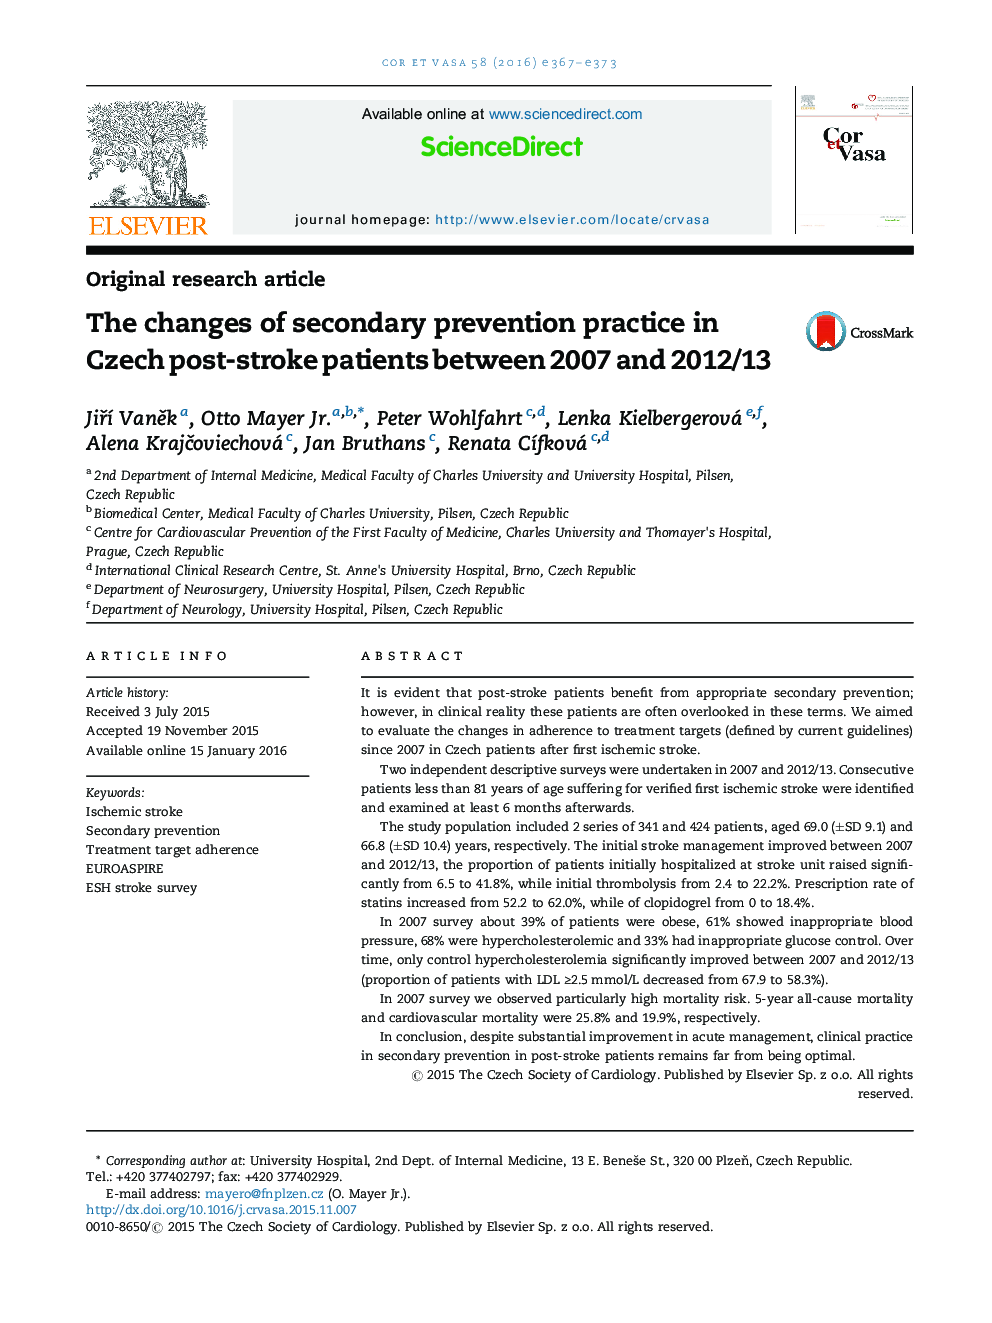 The changes of secondary prevention practice in Czech post-stroke patients between 2007 and 2012/13